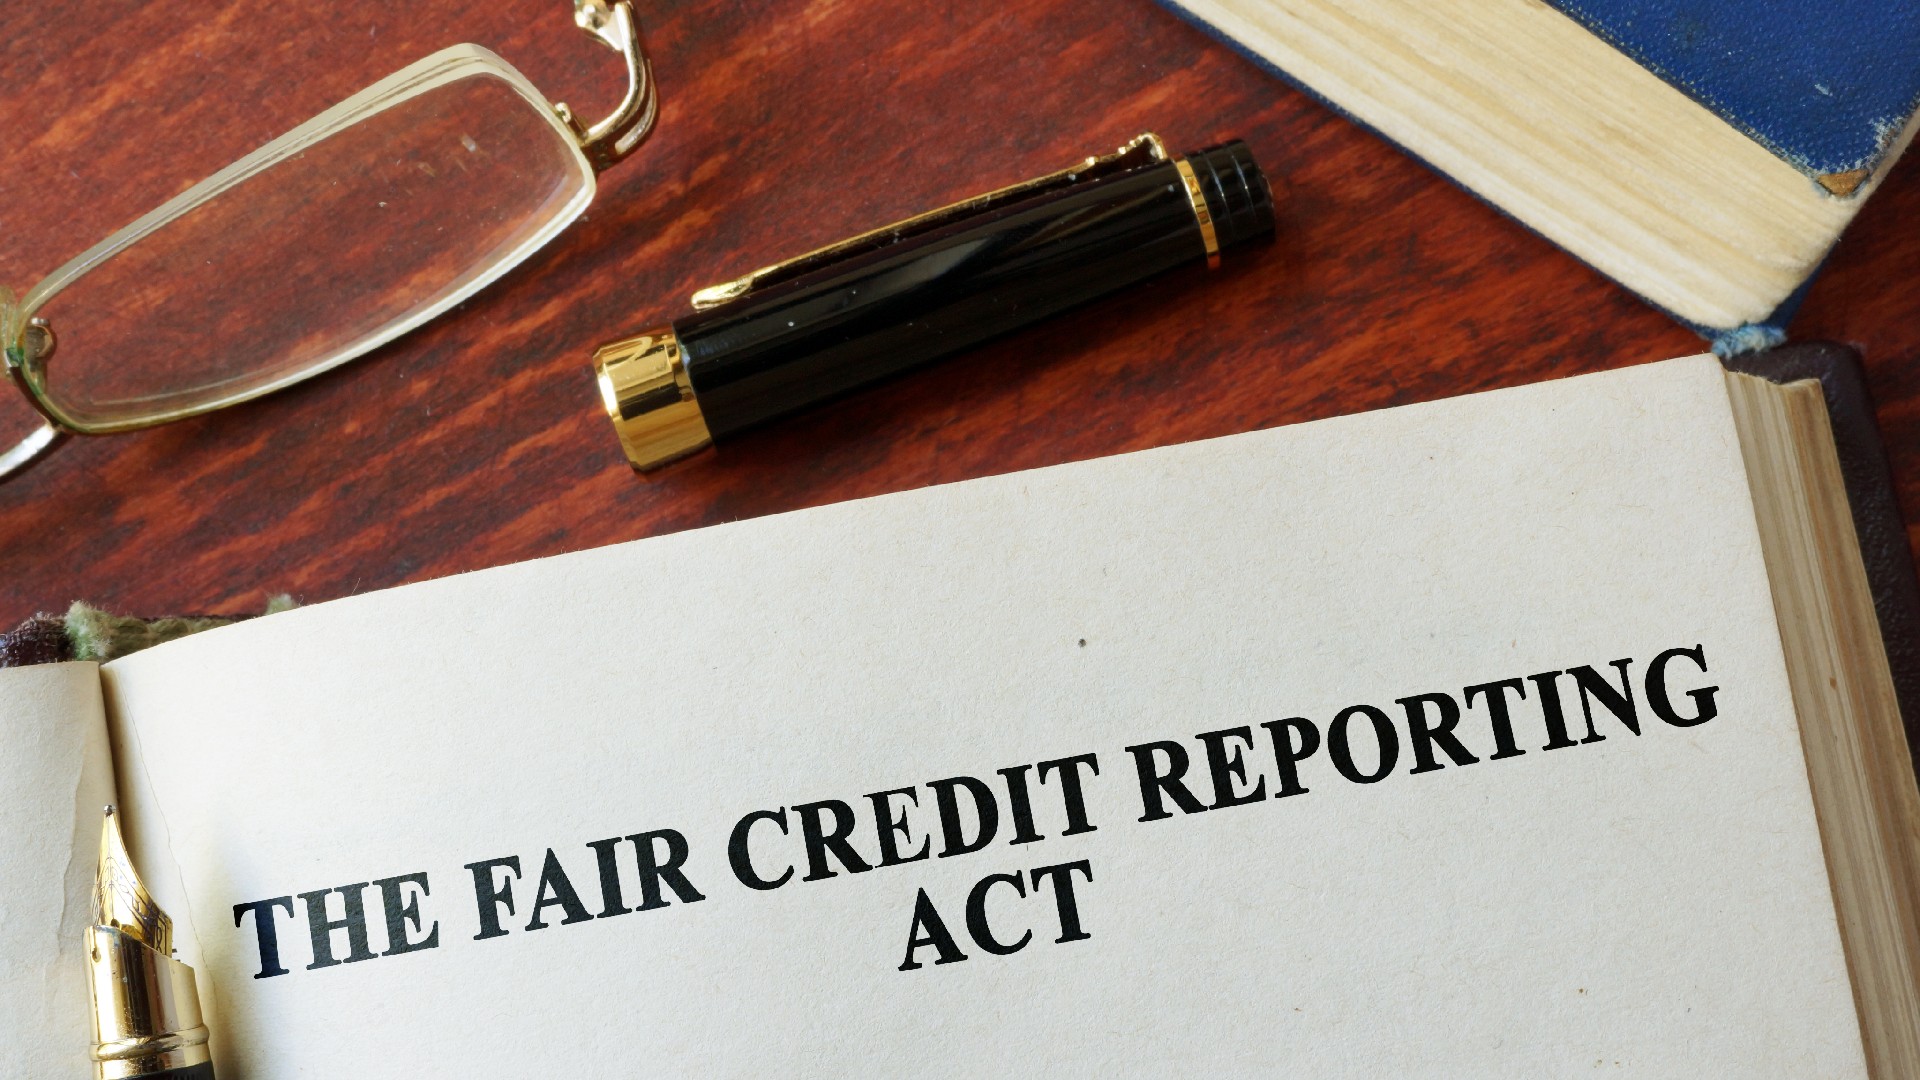 The Fair Credit Reporting Act written on a page